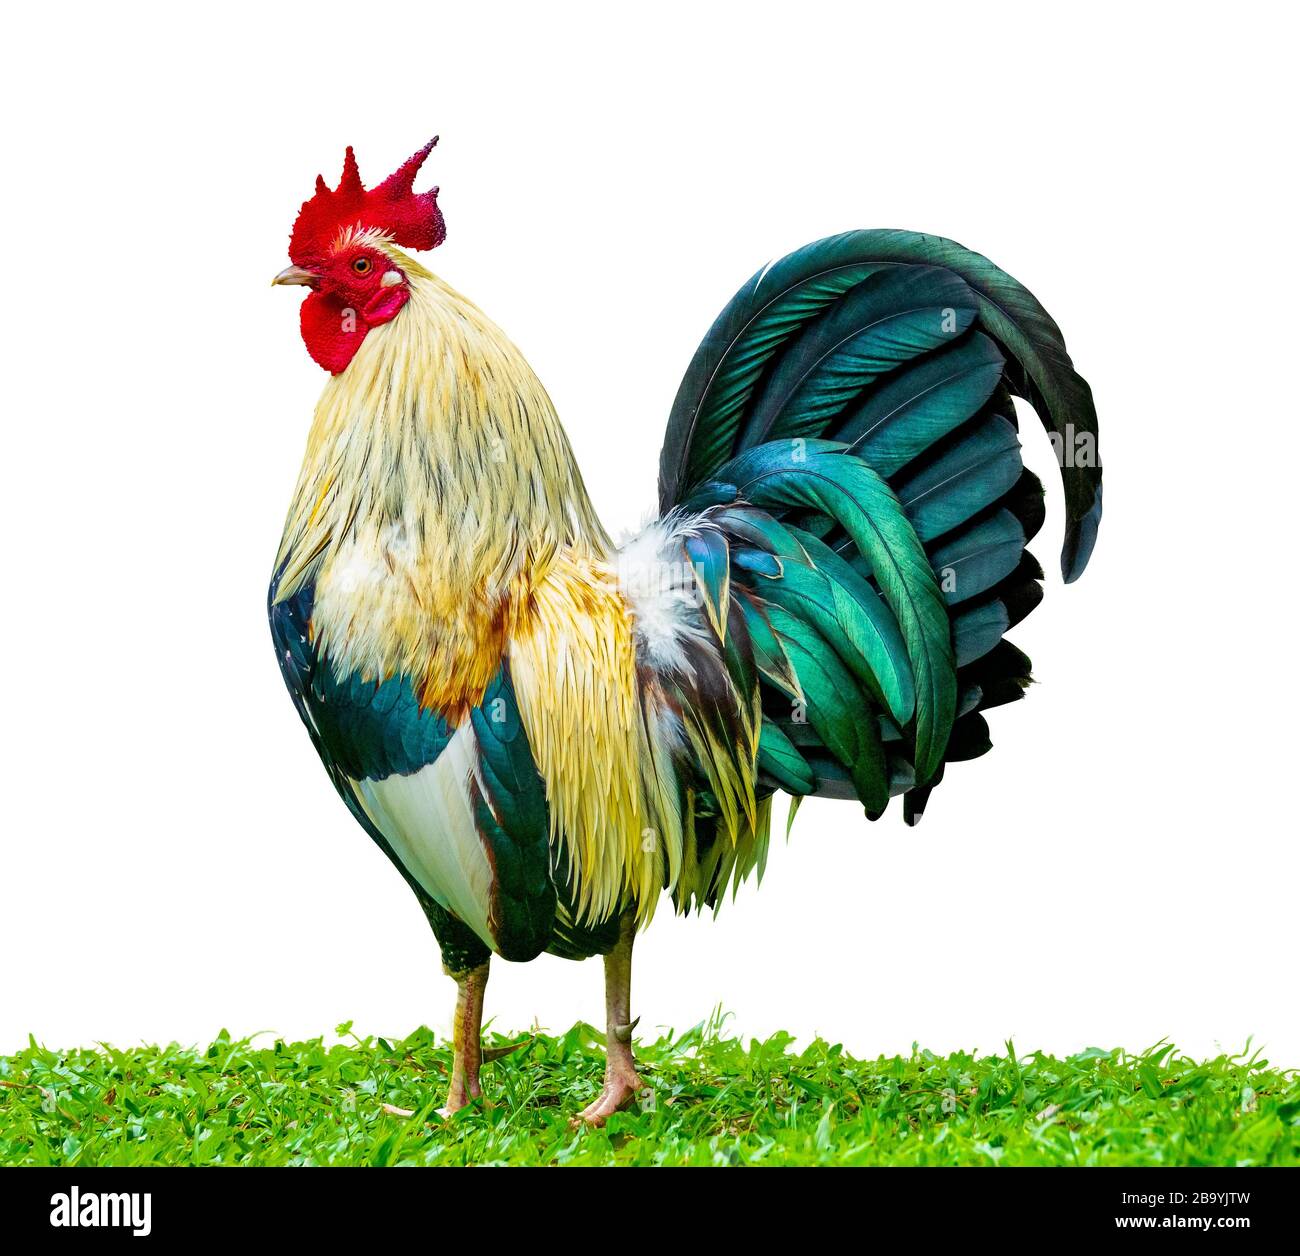 An Isolated Proud Rooster (Cockerel) Standing In The Grass Symbolising Pride And Masculinity Stock Photo